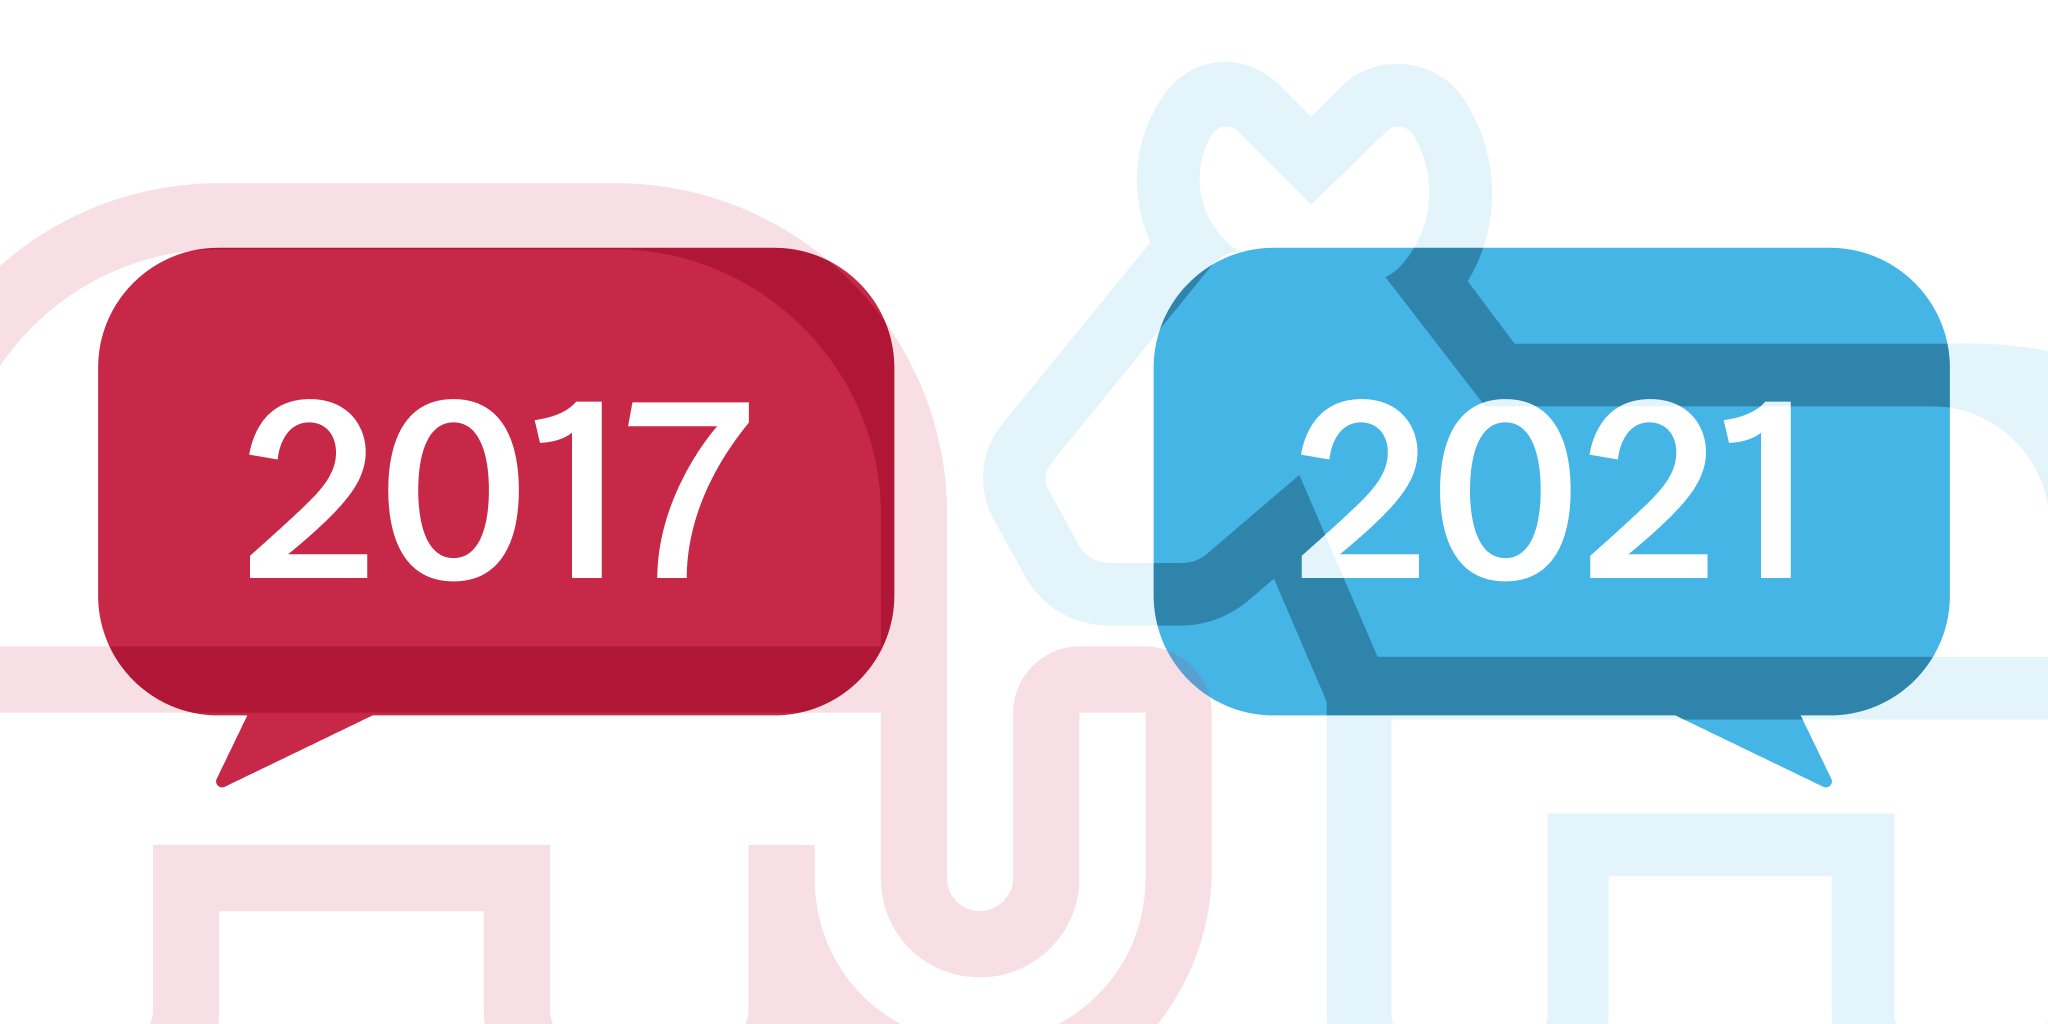 2017 comment bubble with red elephant background facing 2019 comment bubble with blue donkey background